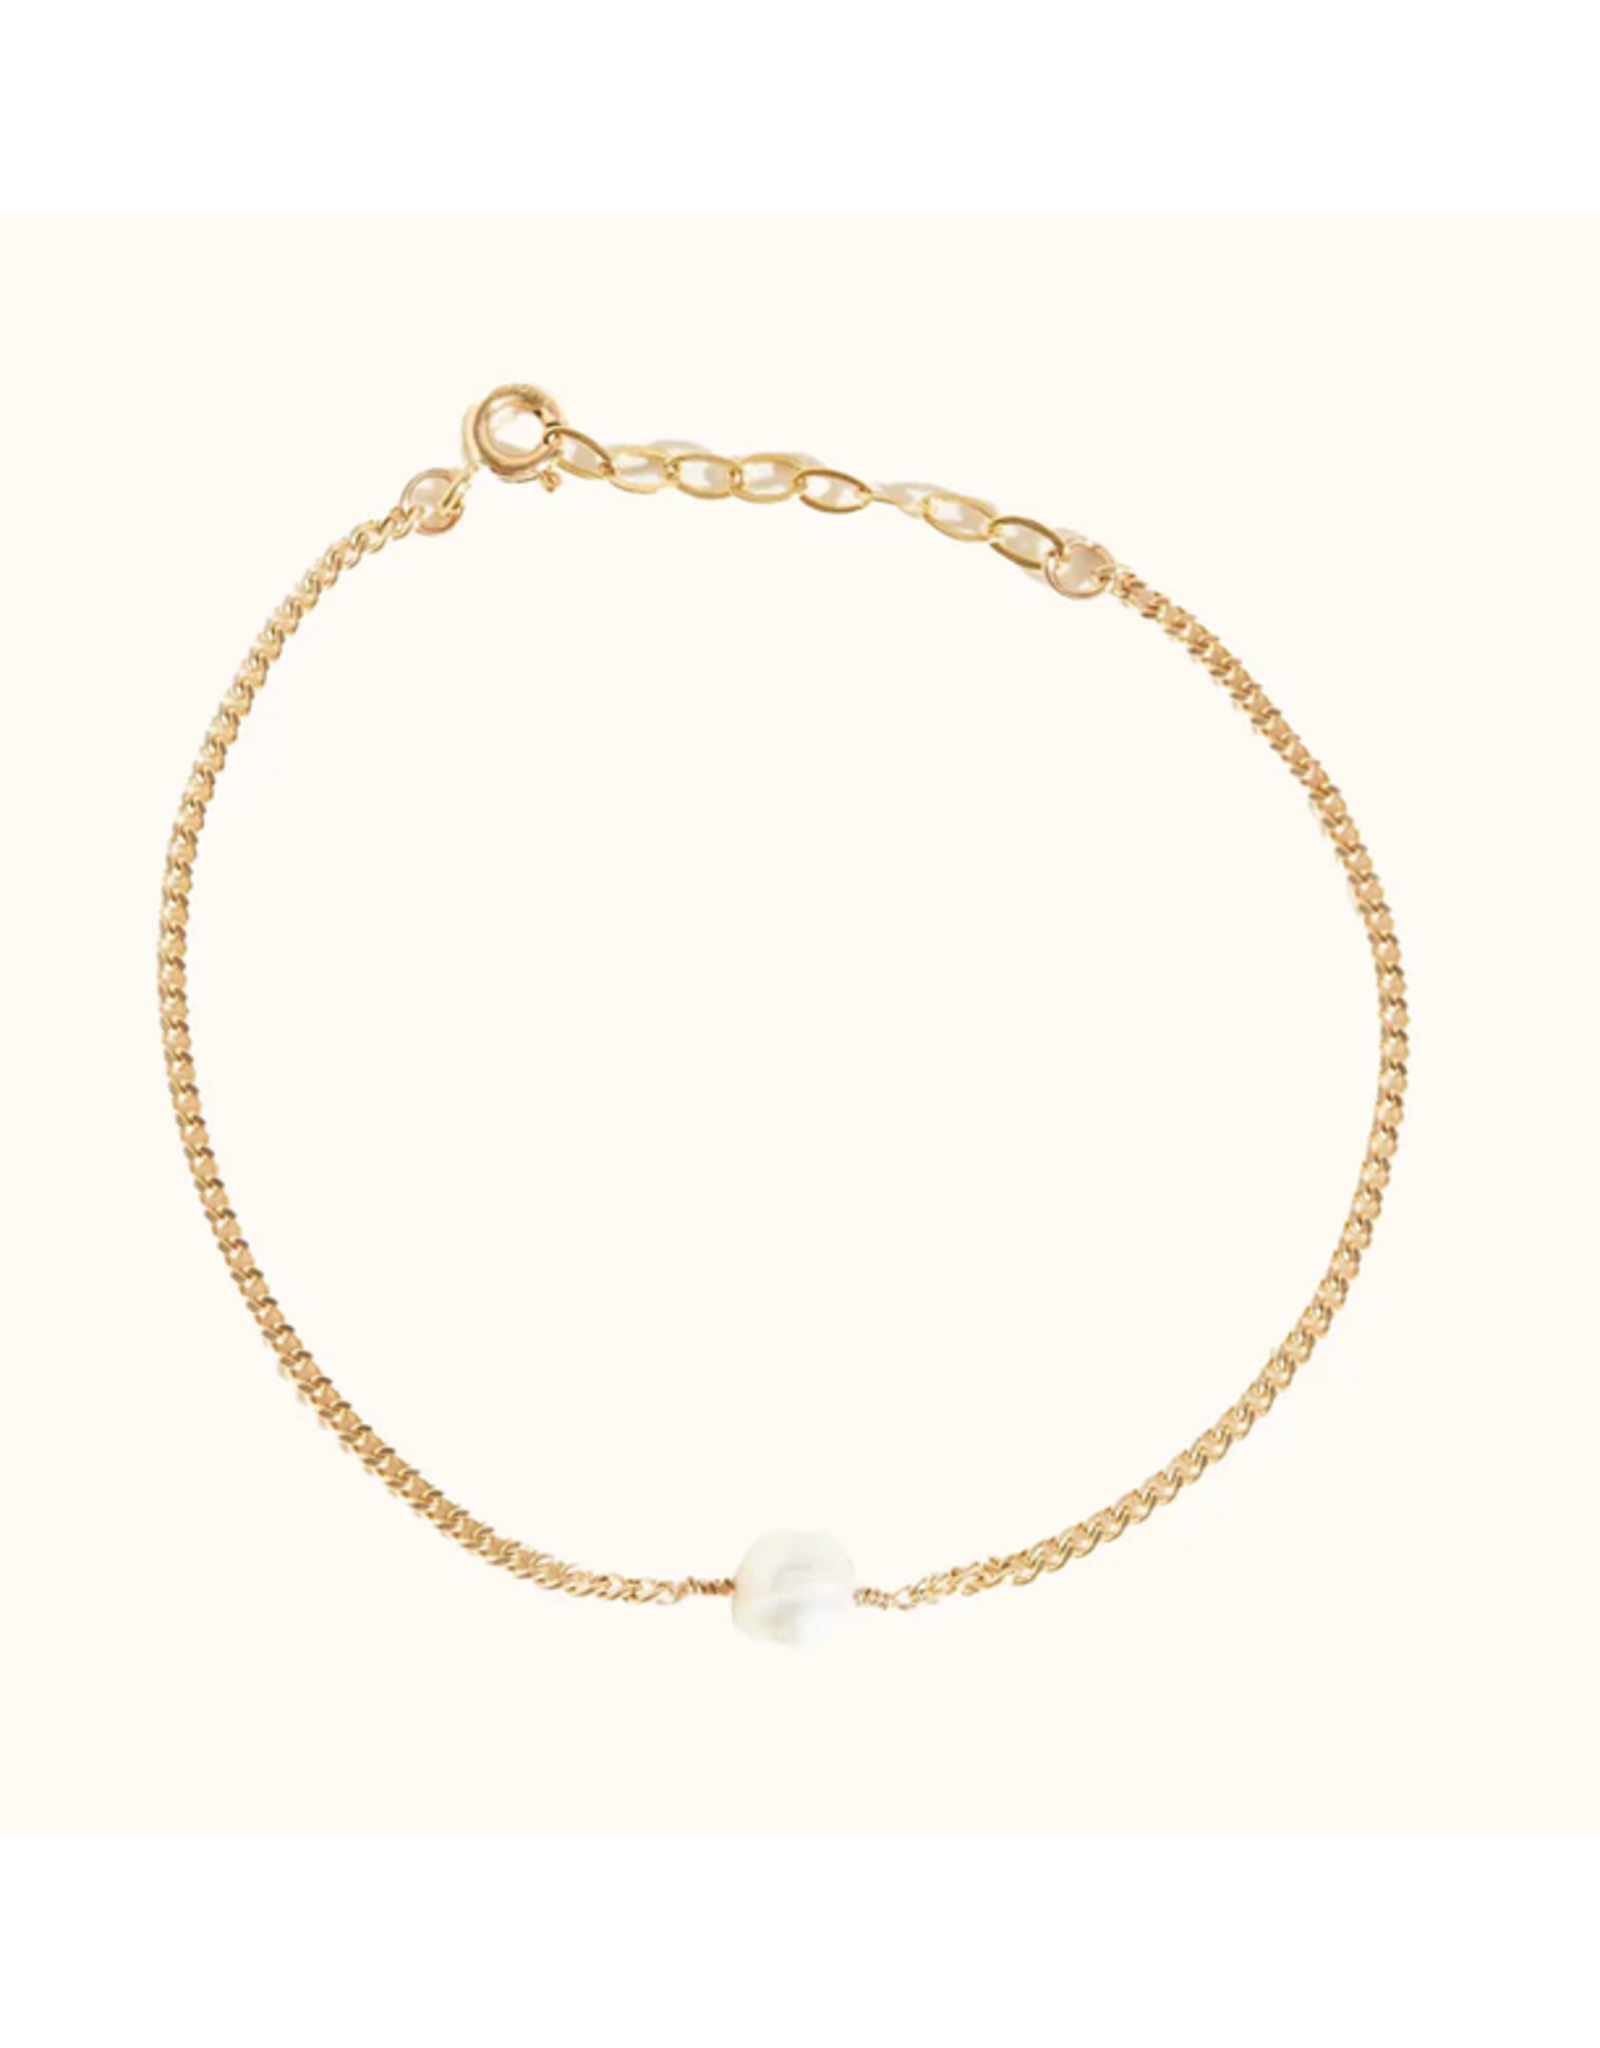 ABLE Able Pearl Curb Chain Bracelet